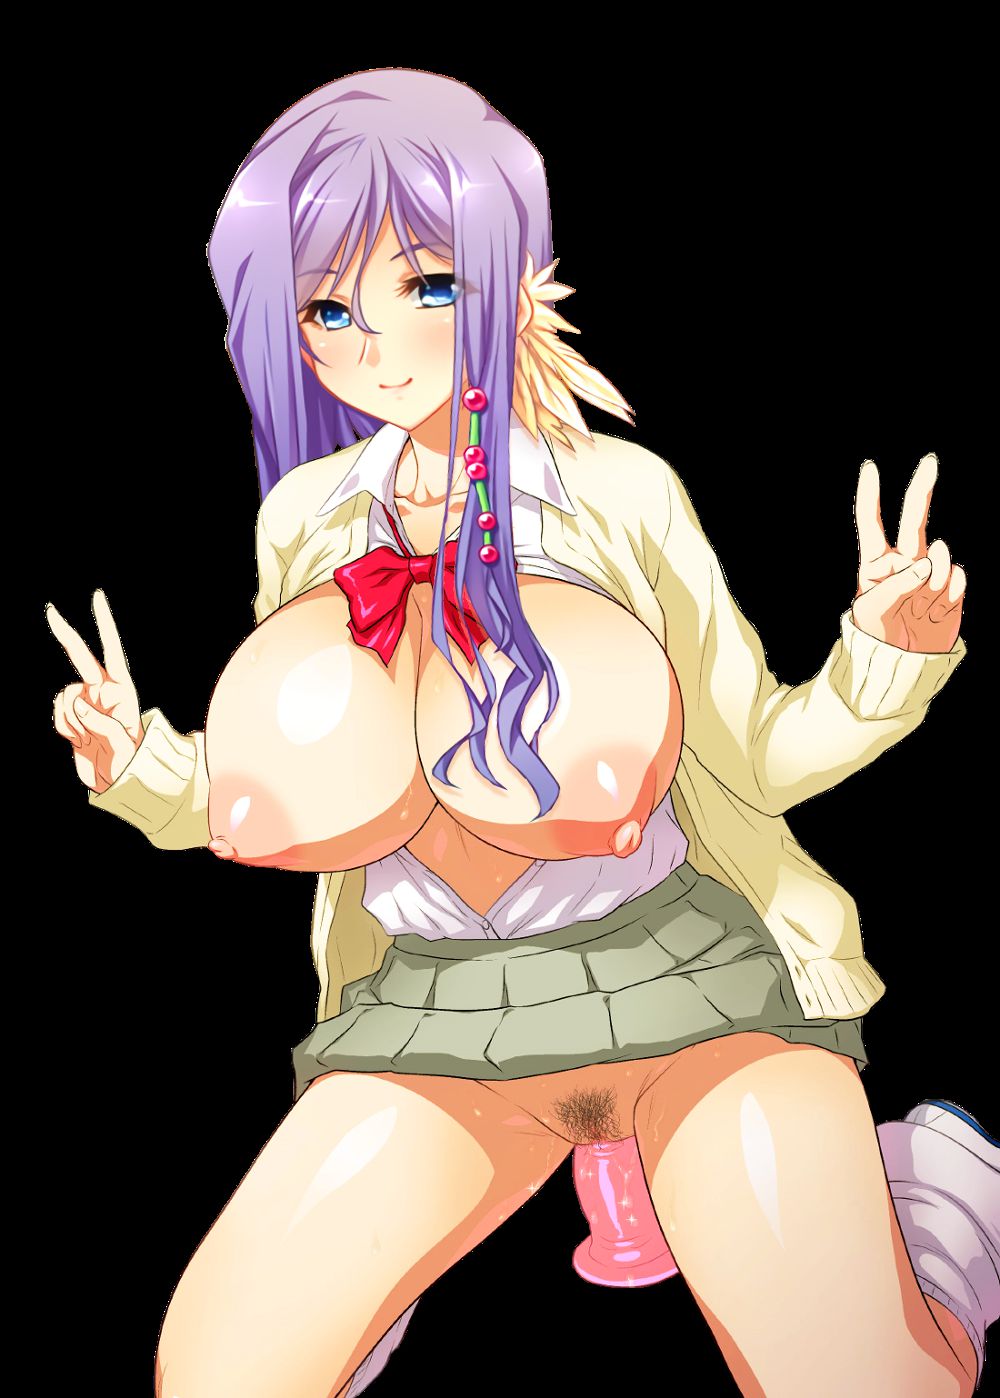 [Erotica character material] PNG background transmission erotic image such as anime character Part 315 19